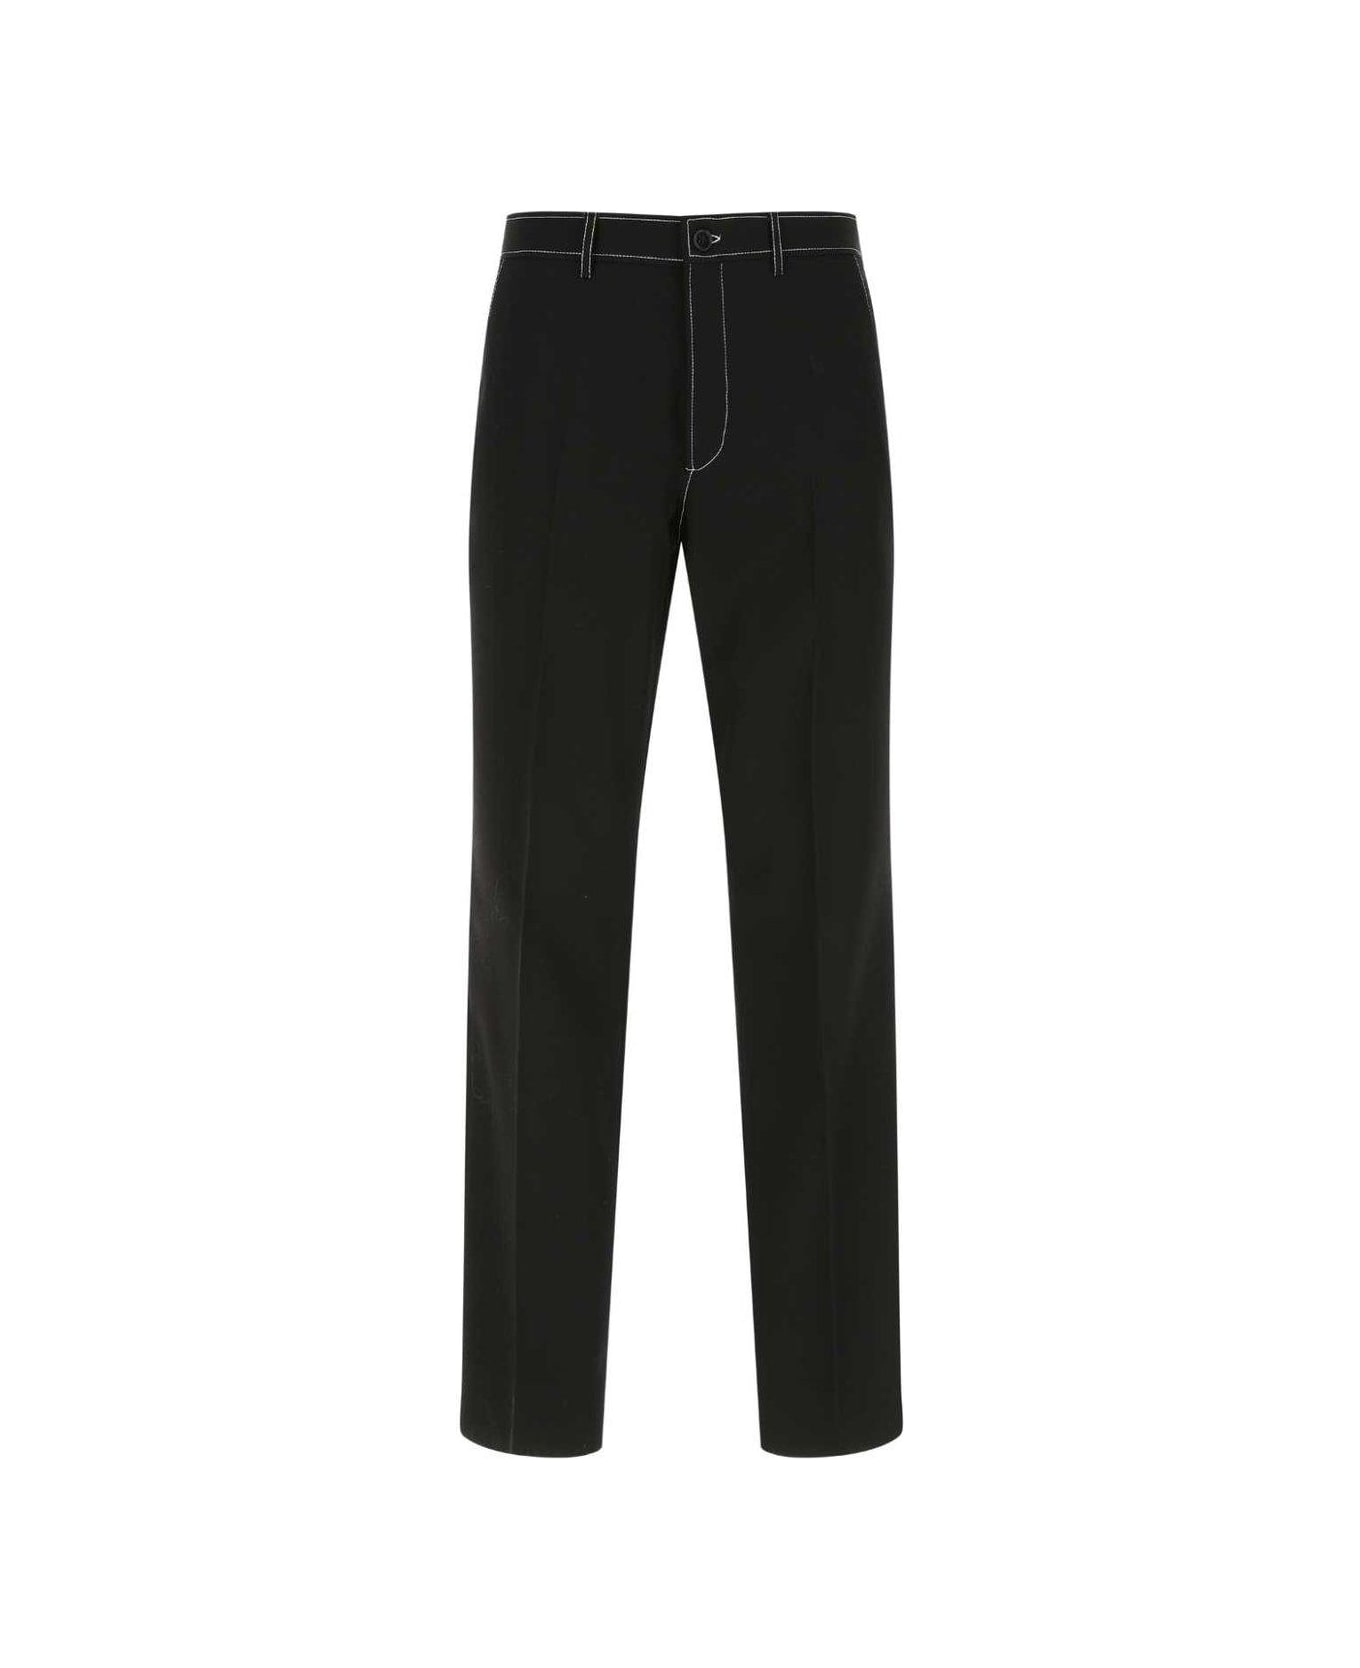 Burberry Straight-leg Tailored Trousers - BLACK ボトムス